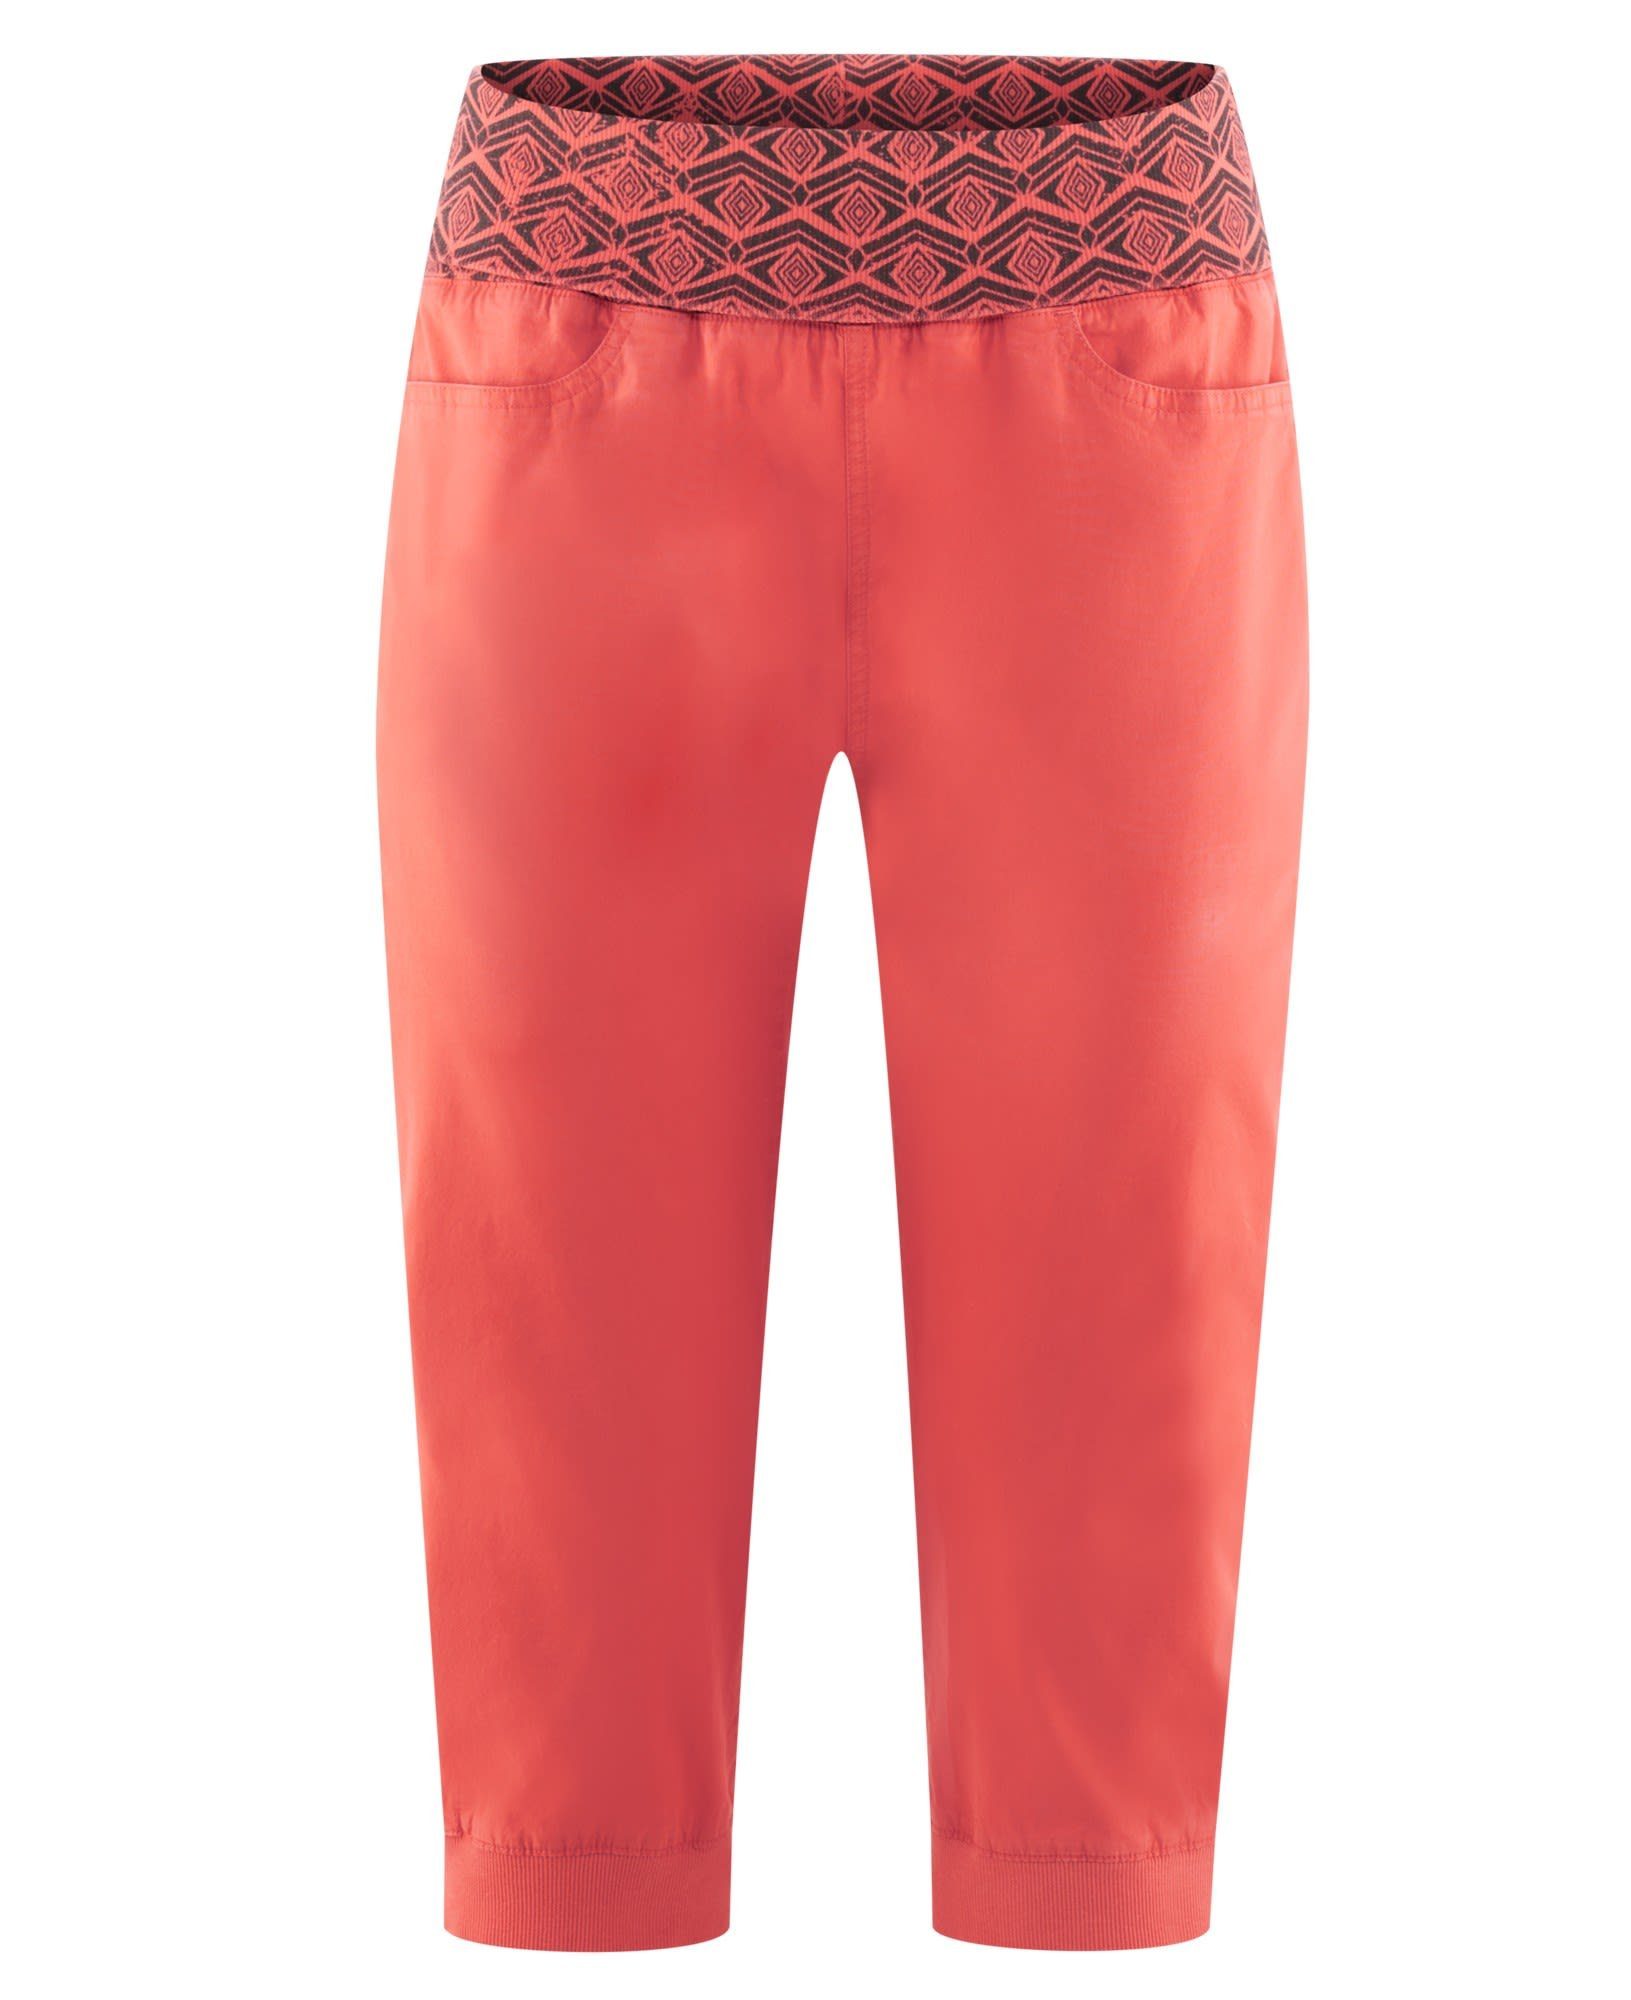 Red Chili Outdoorhose Red Chili W Gela 3/4 Pants Ii Damen Hose Clay